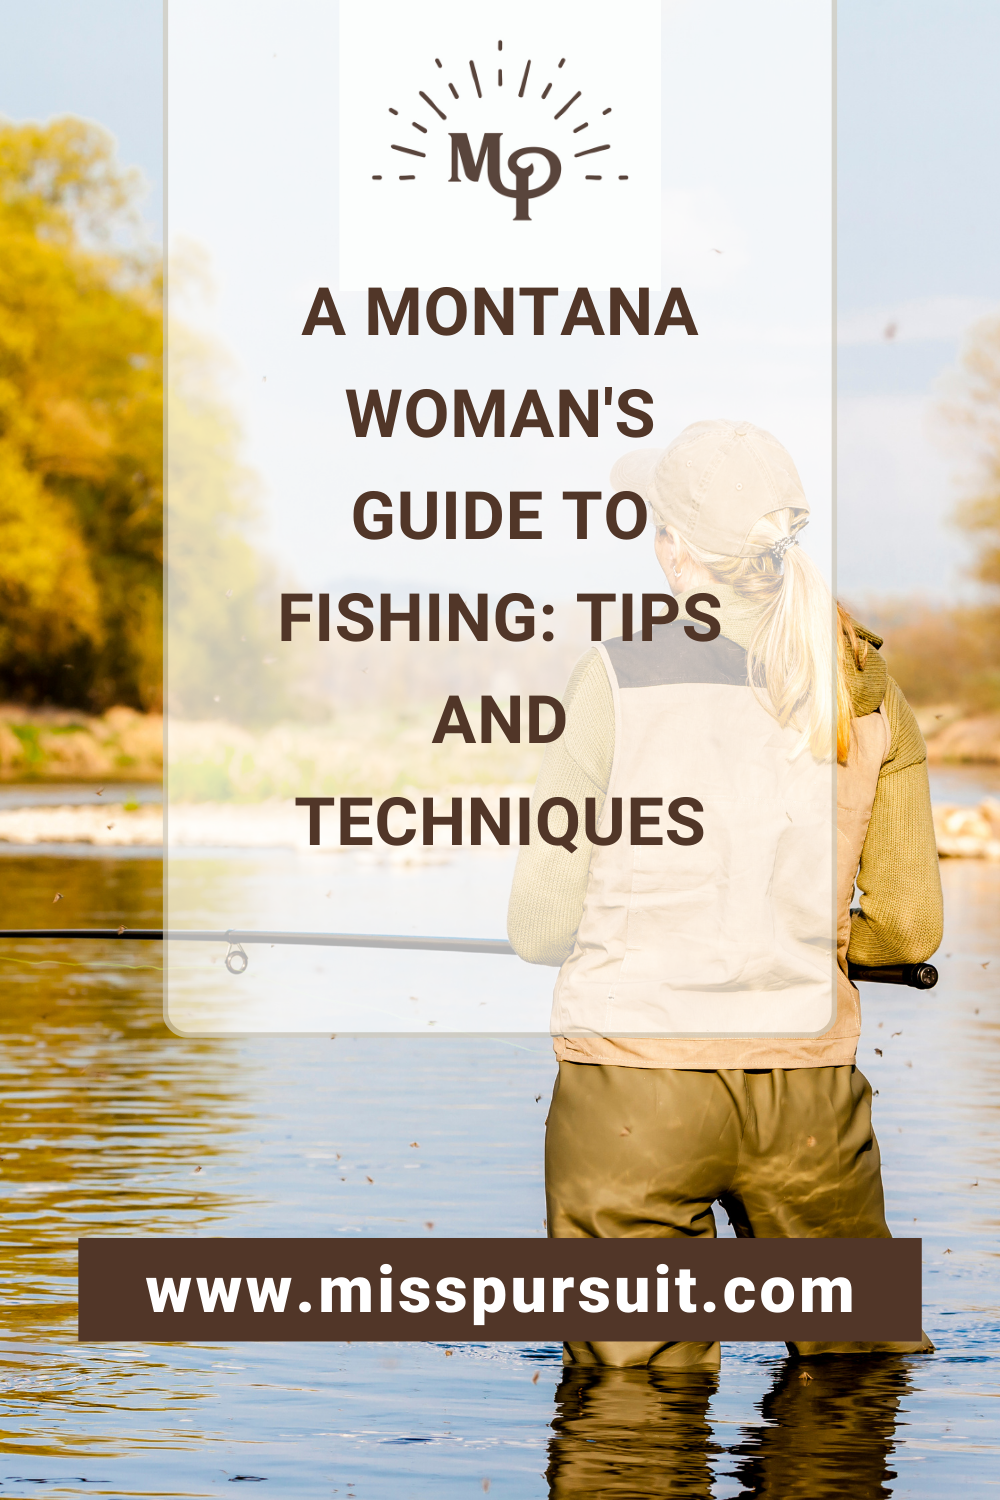 A Montana Woman's Guide to Fishing: Tips and Techniques